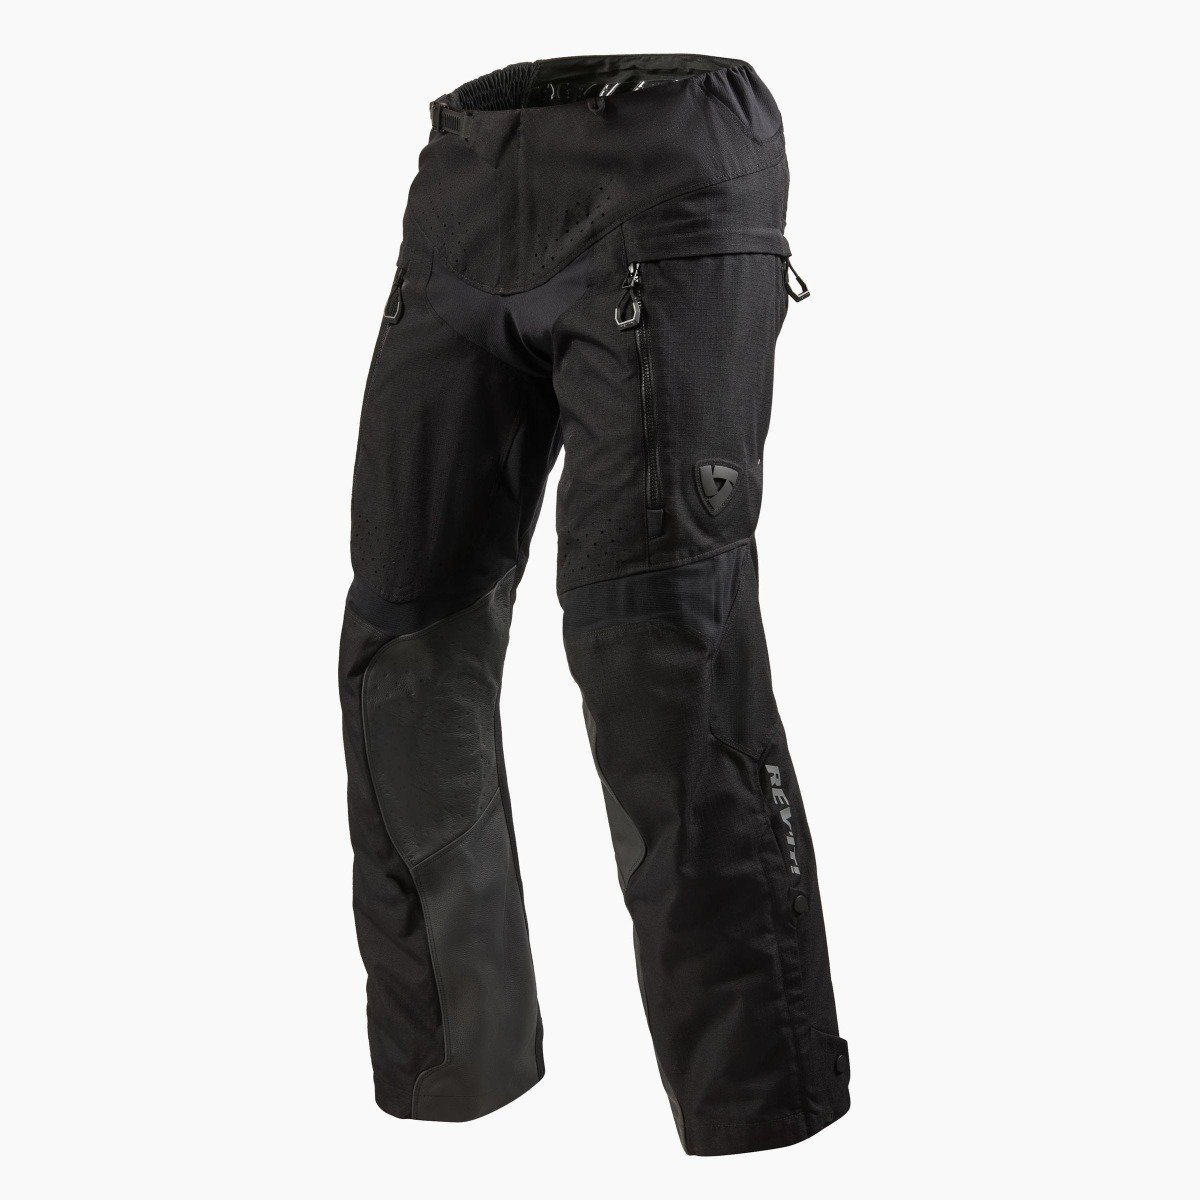 Image of REV'IT! Continent Long Black Motorcycle Pants Size XL ID 8700001297158